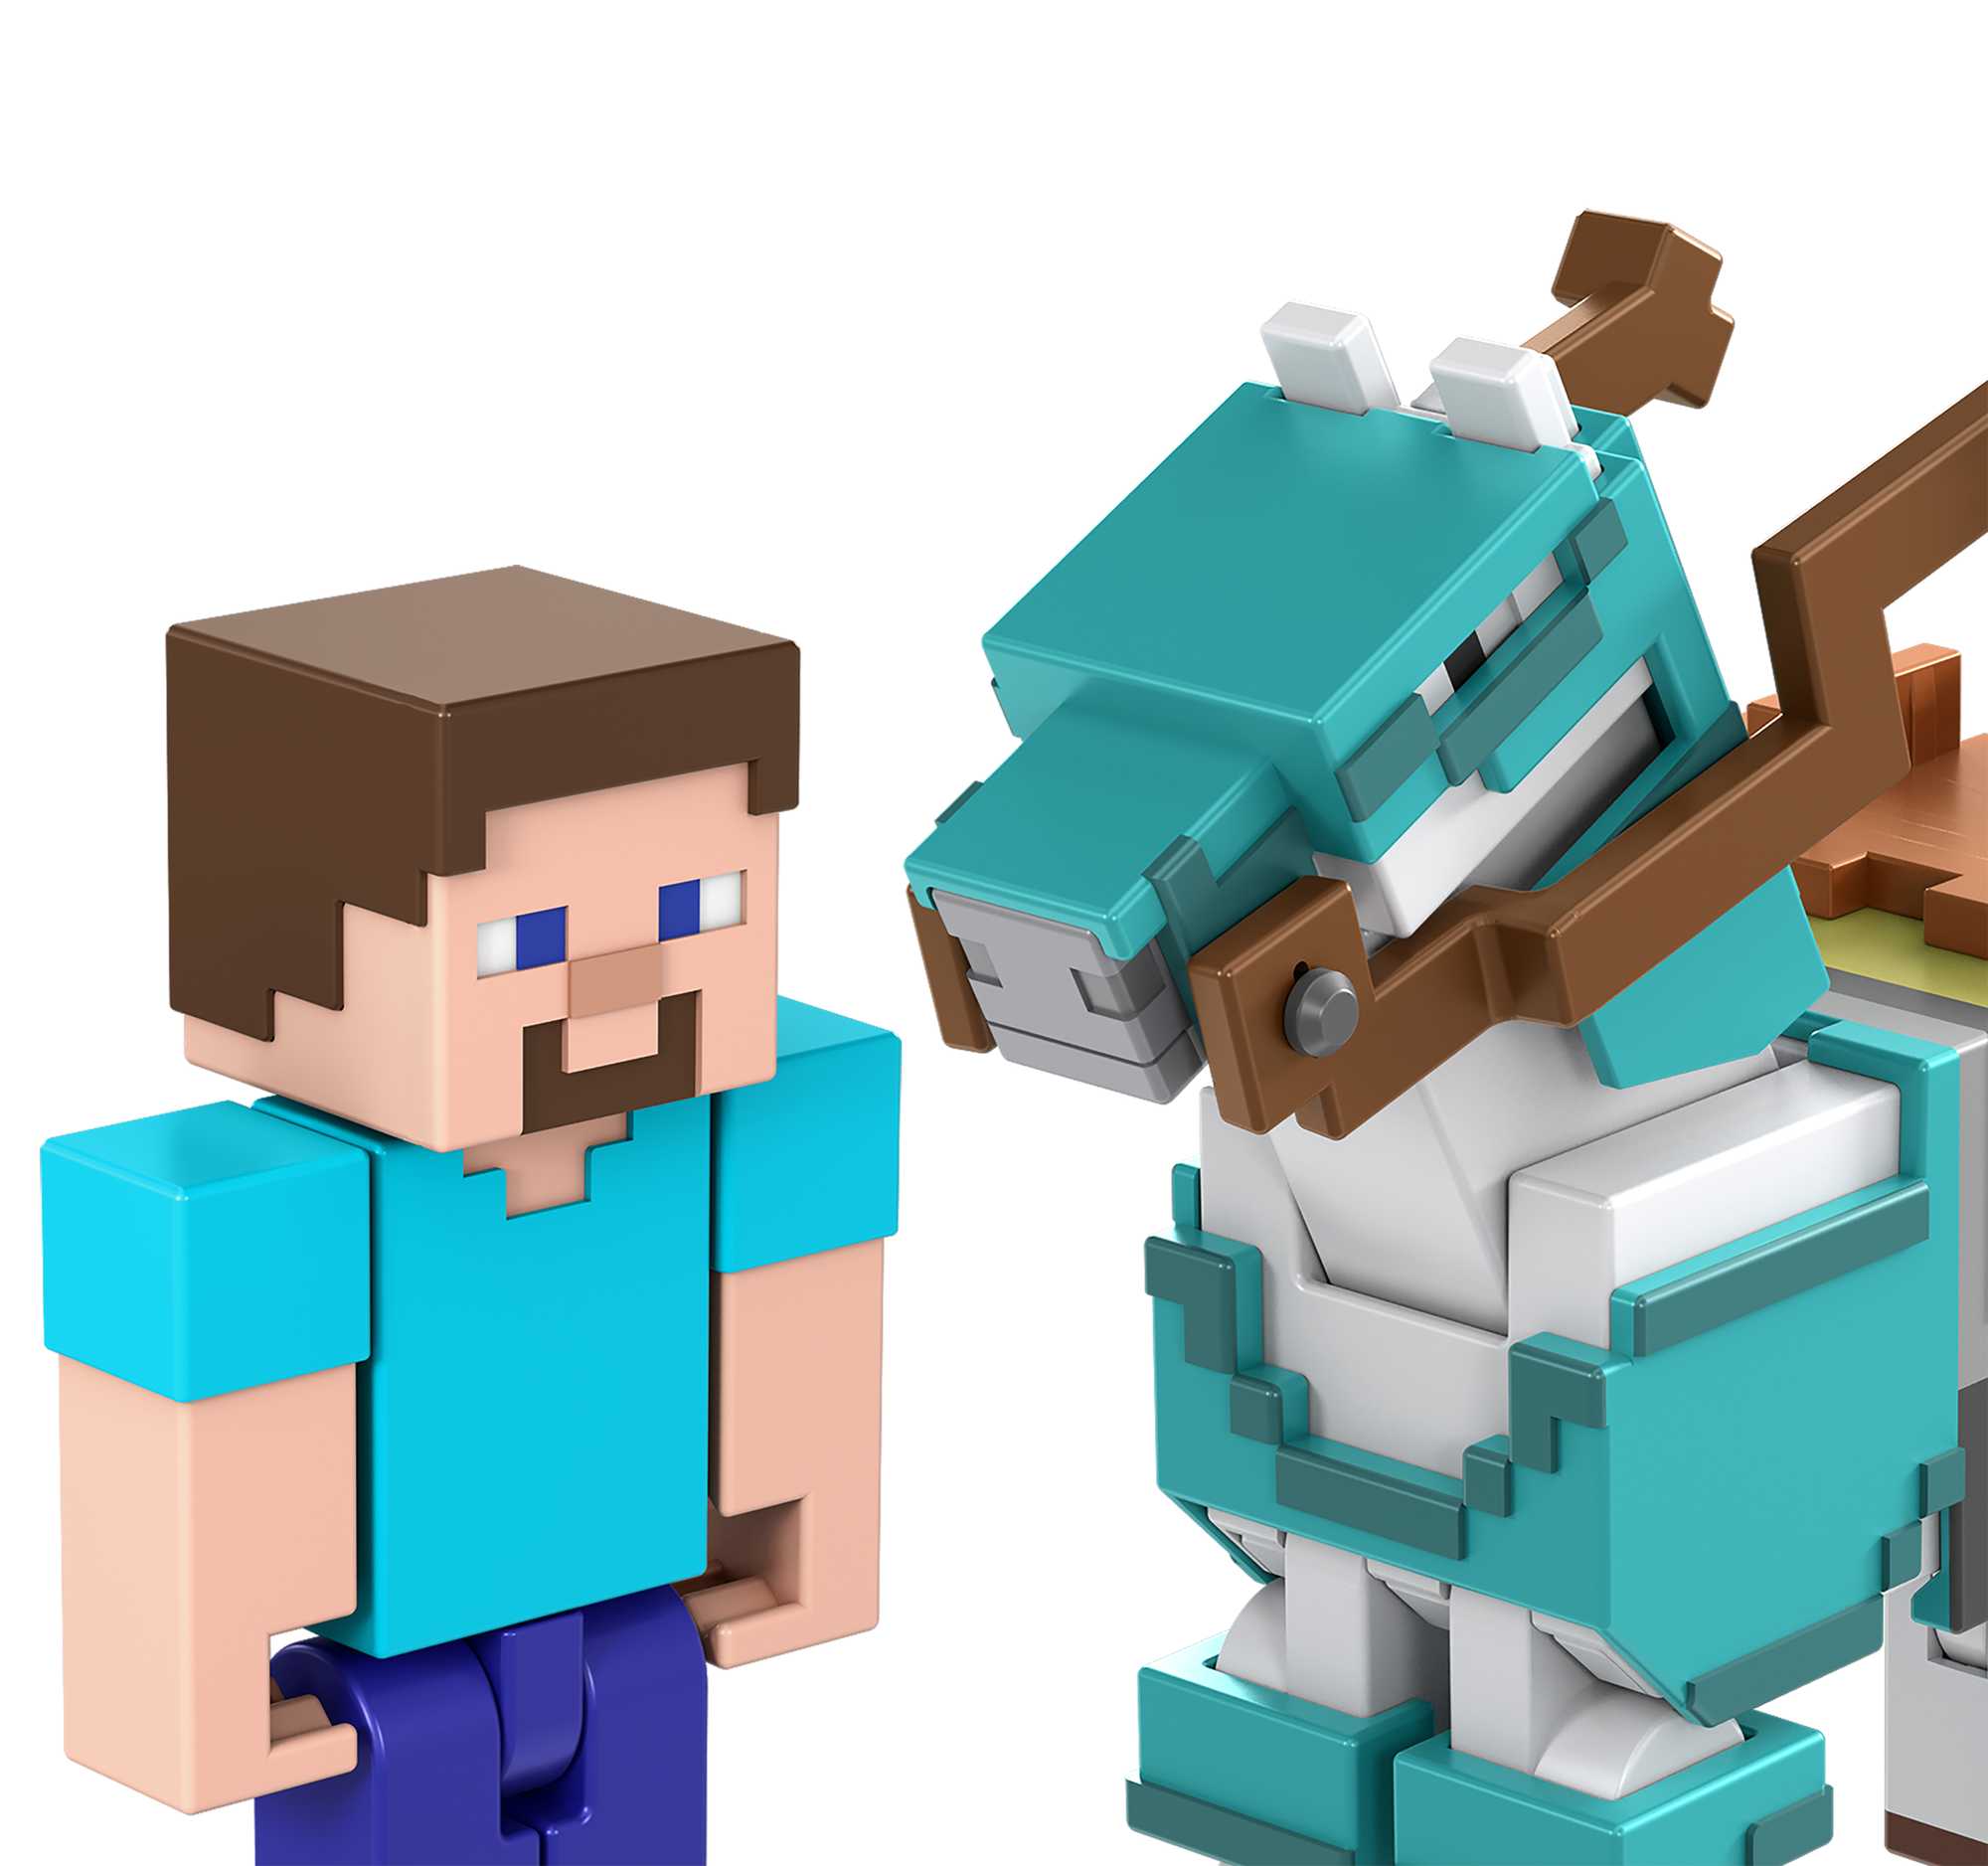 Minecraft Steve And Armored Horse Figures | Mattel